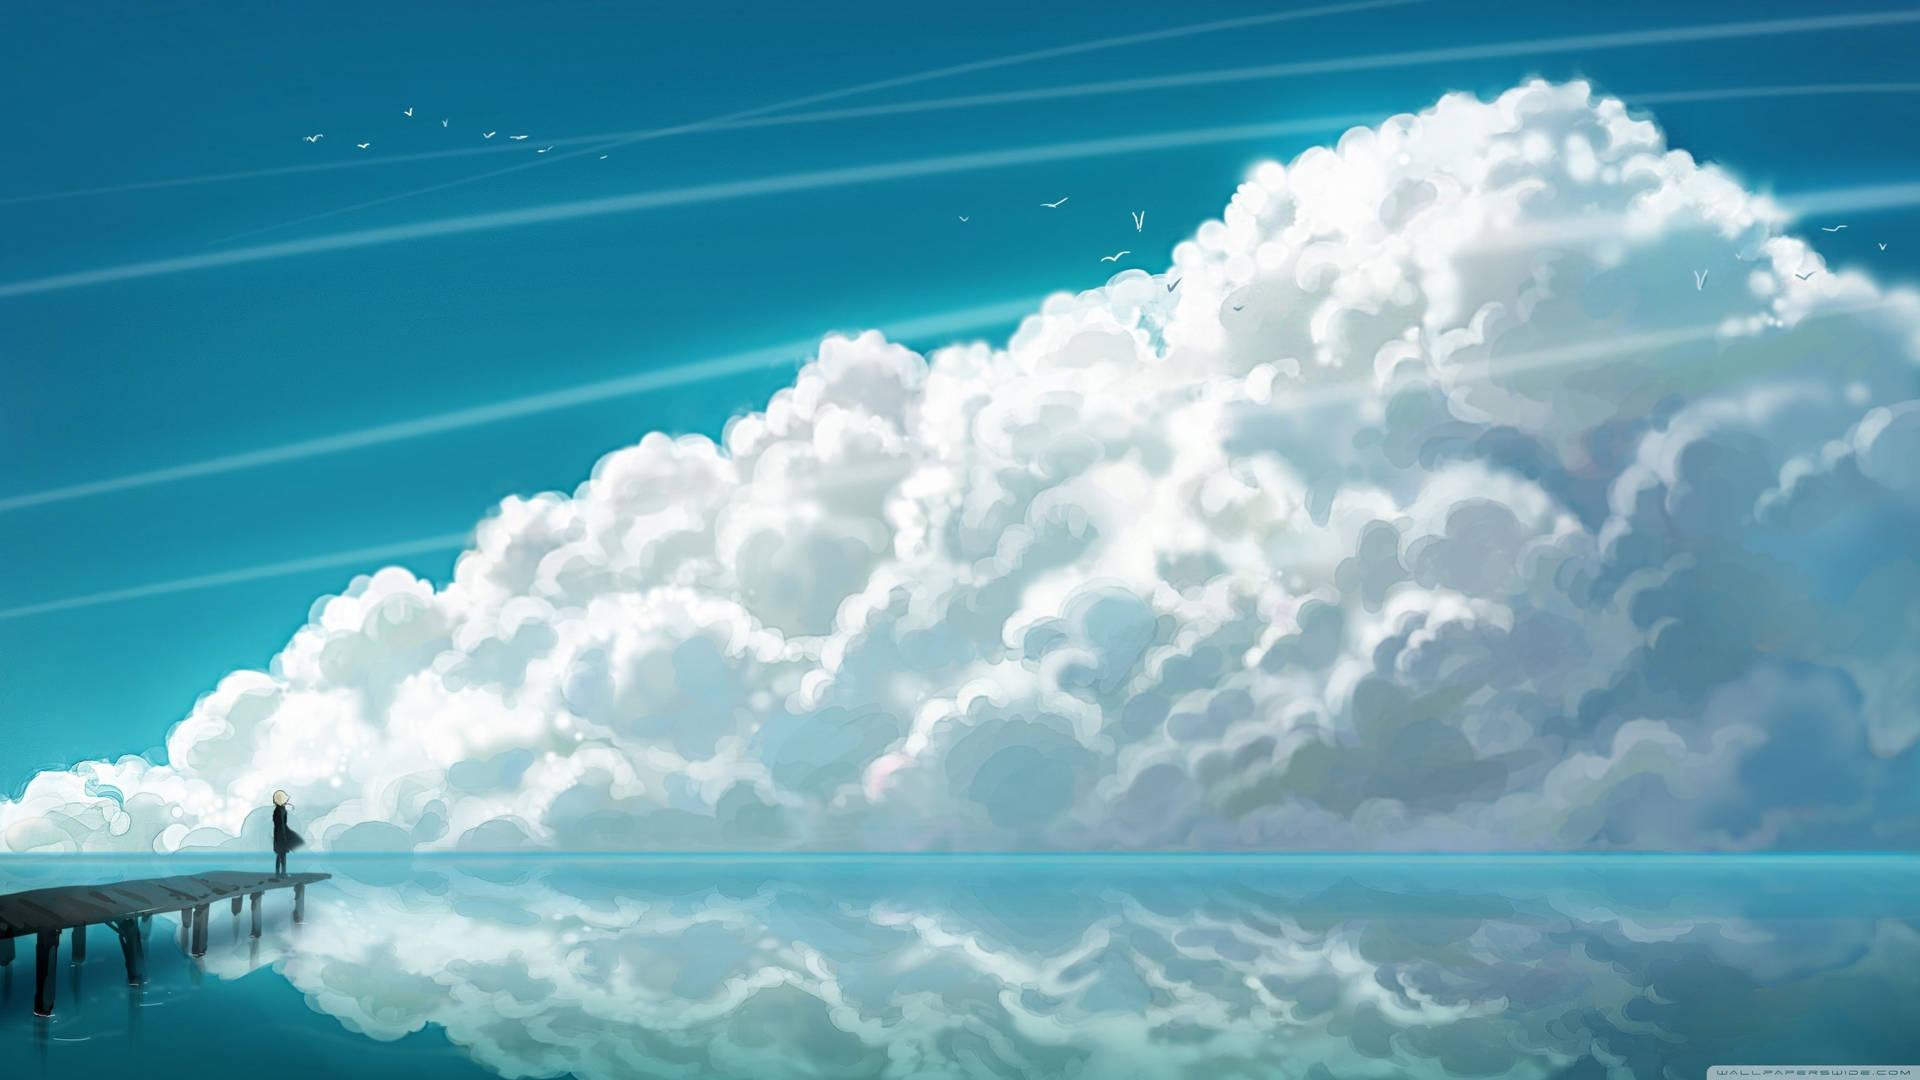 Clouds 3554X1999 Wallpaper and Background Image